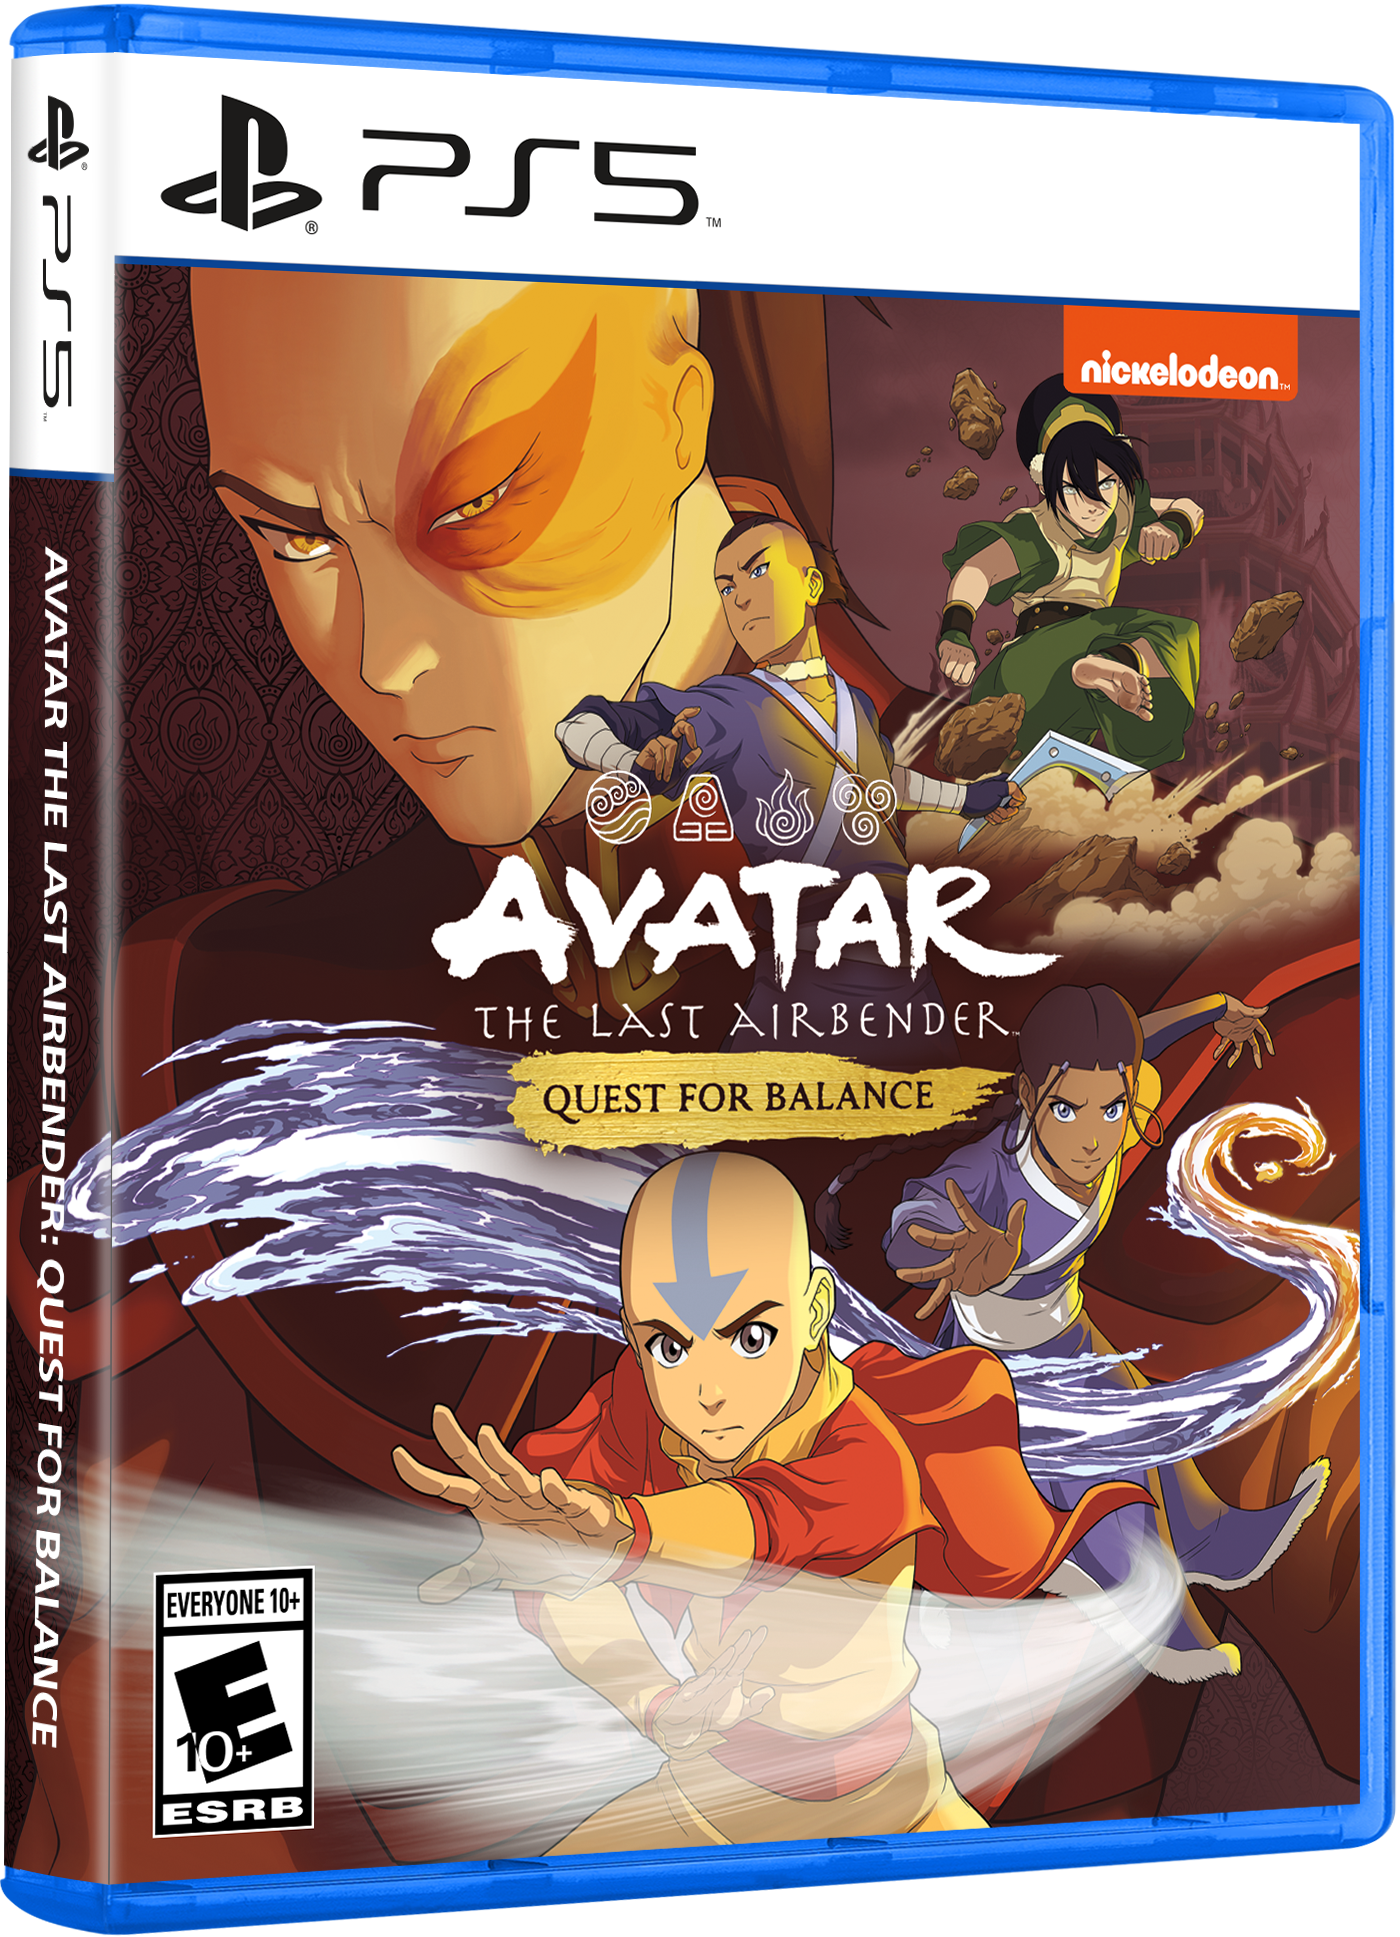 Avatar: Quest for Balance is Lego Star Wars for The Last Airbender - Polygon